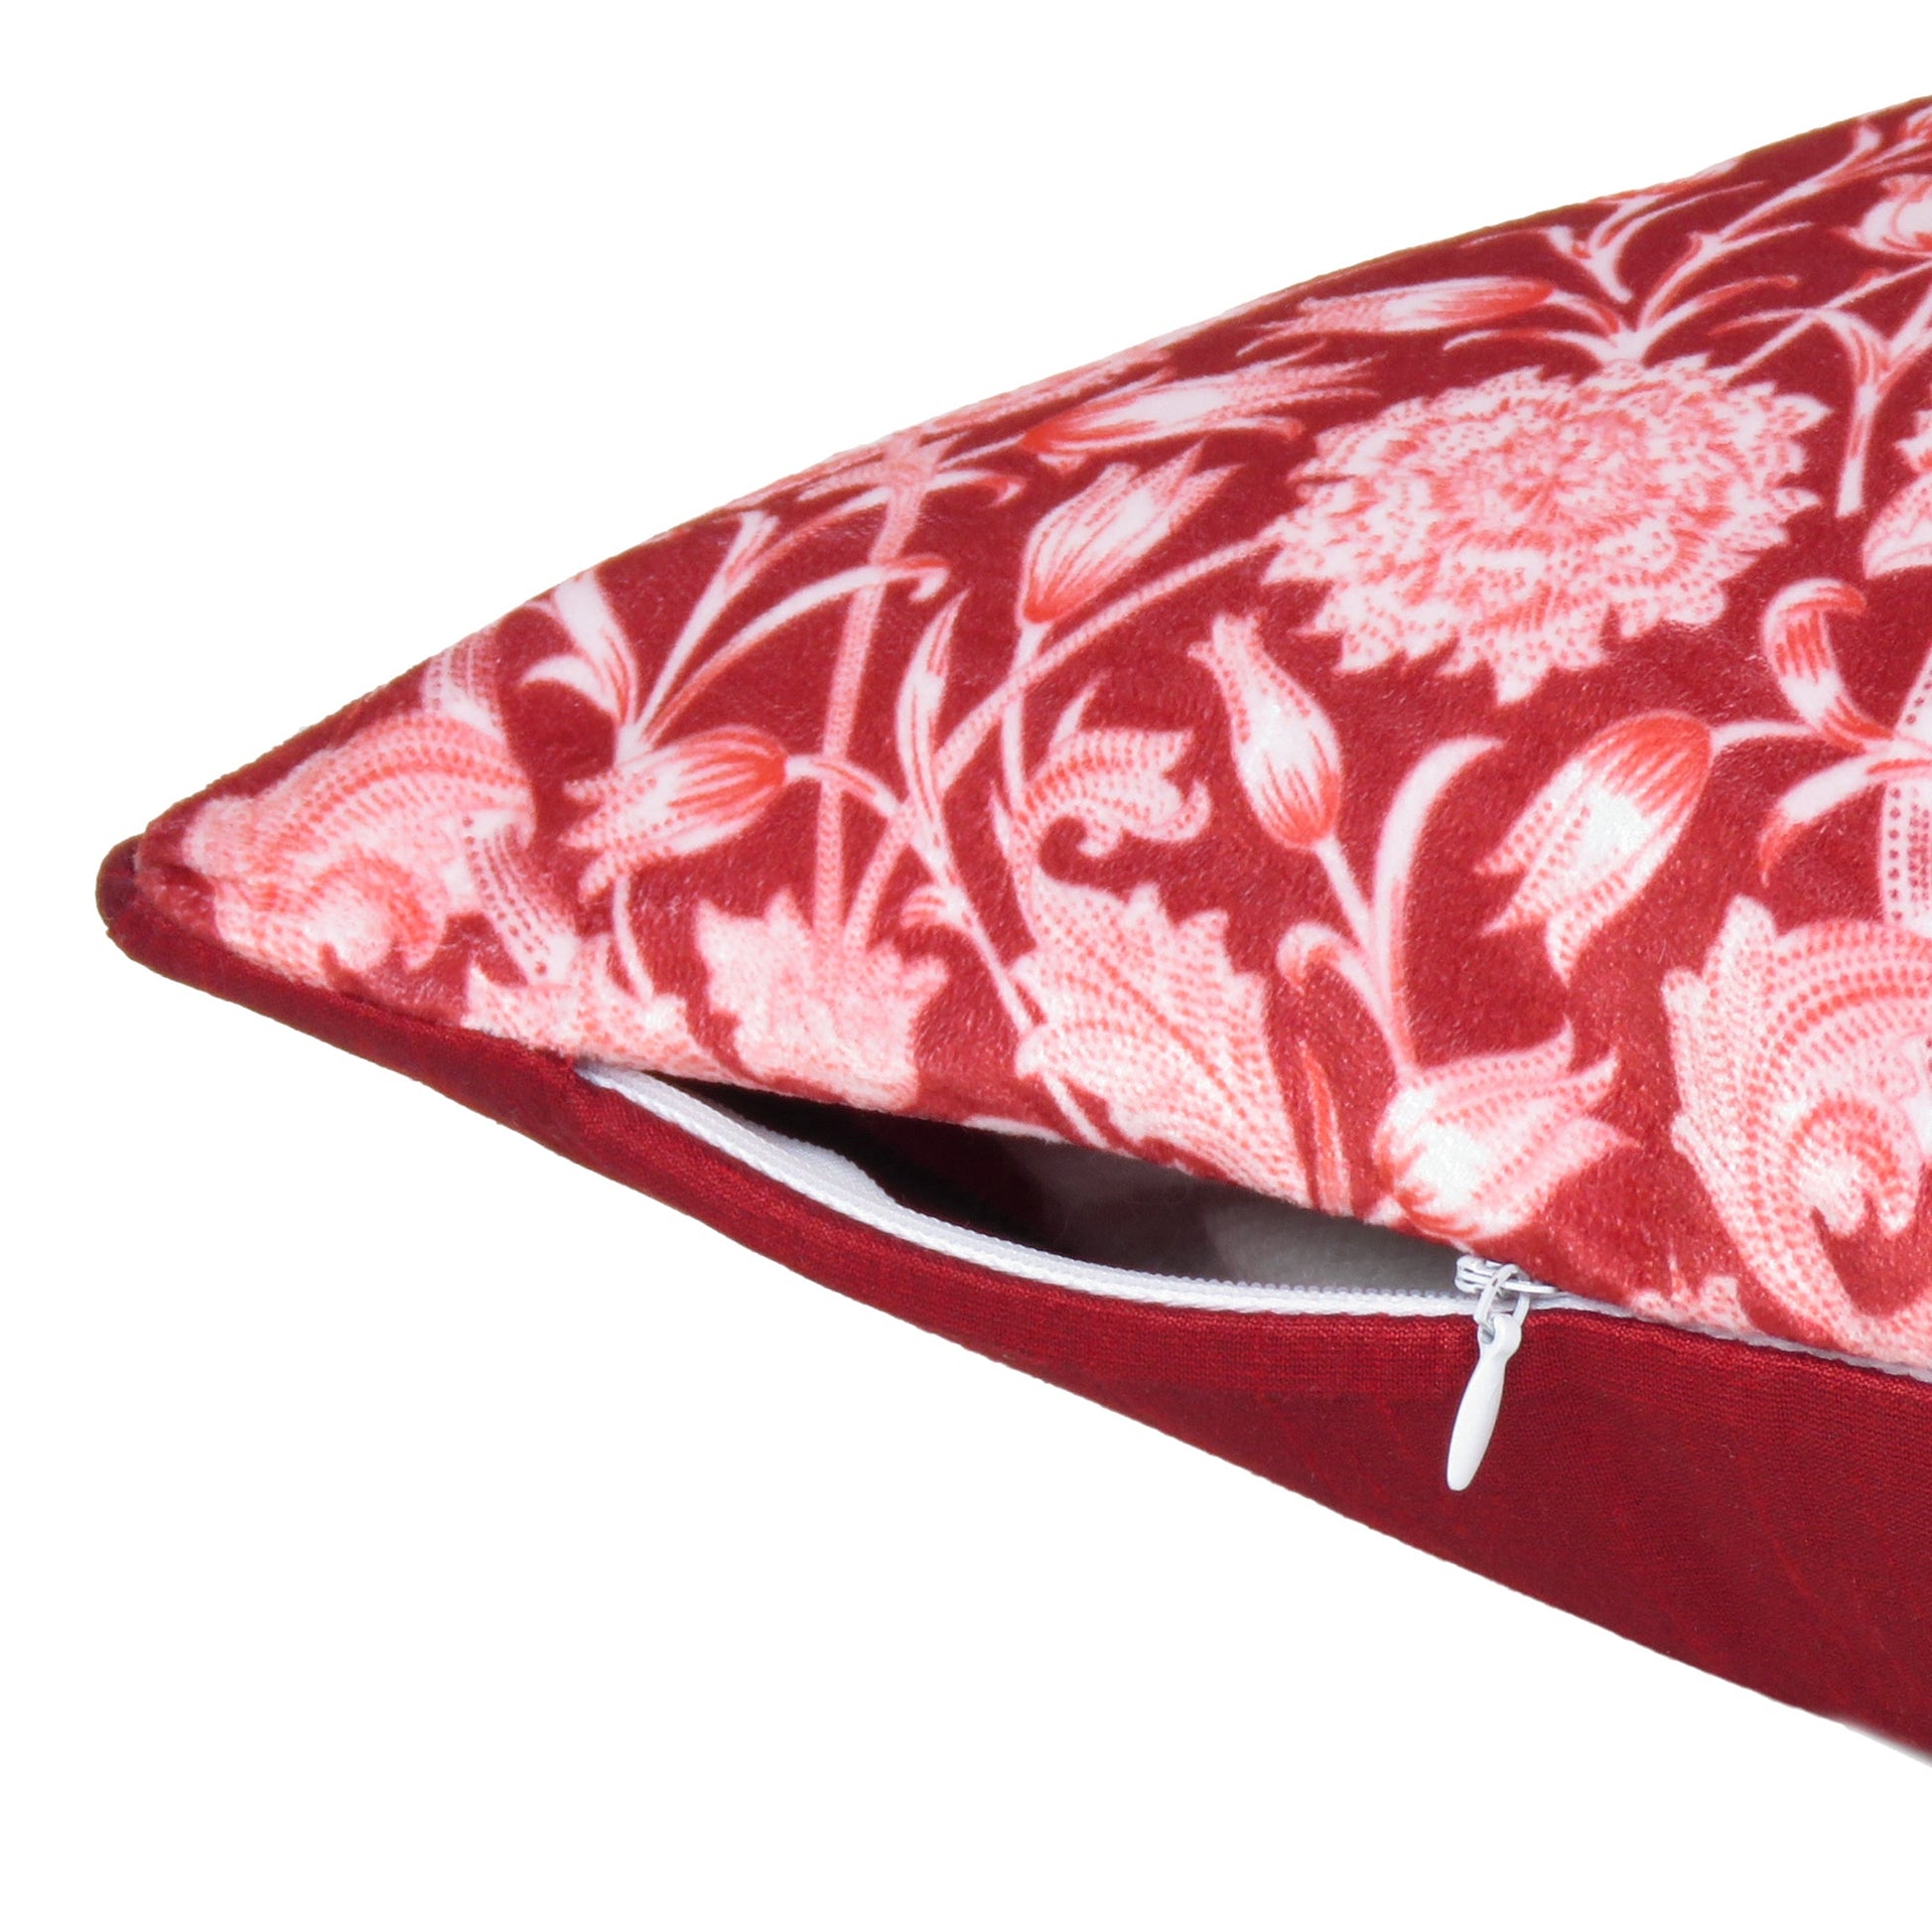 Velvet Polydupion Printed Cushion Covers in Set of 2 - Red & White